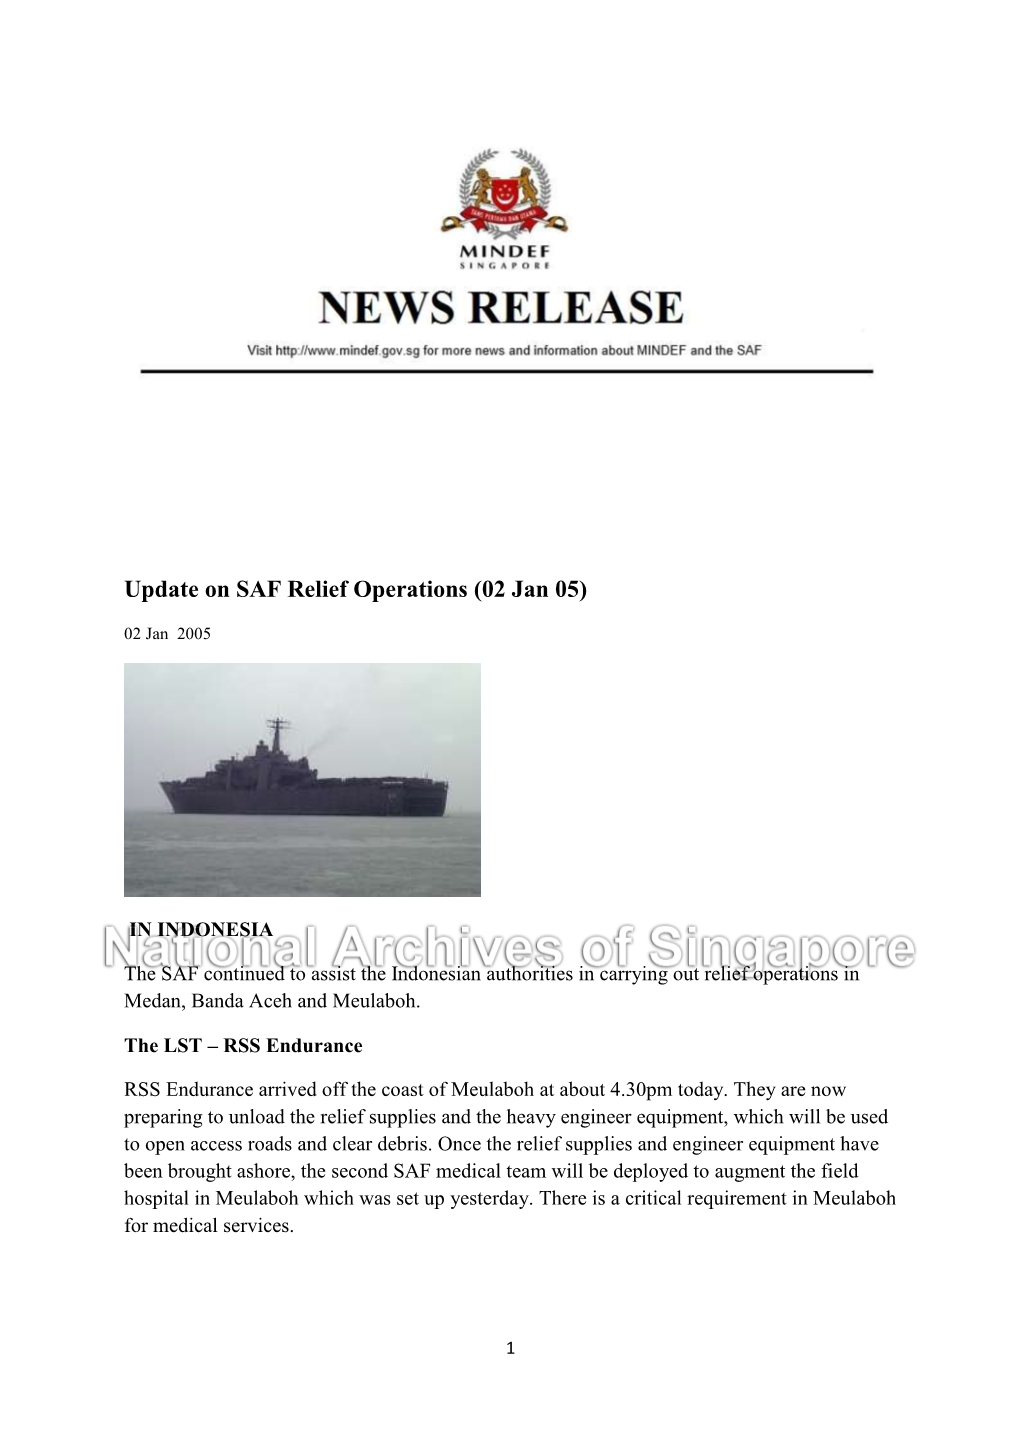 Update on SAF Relief Operations (02 Jan 05)